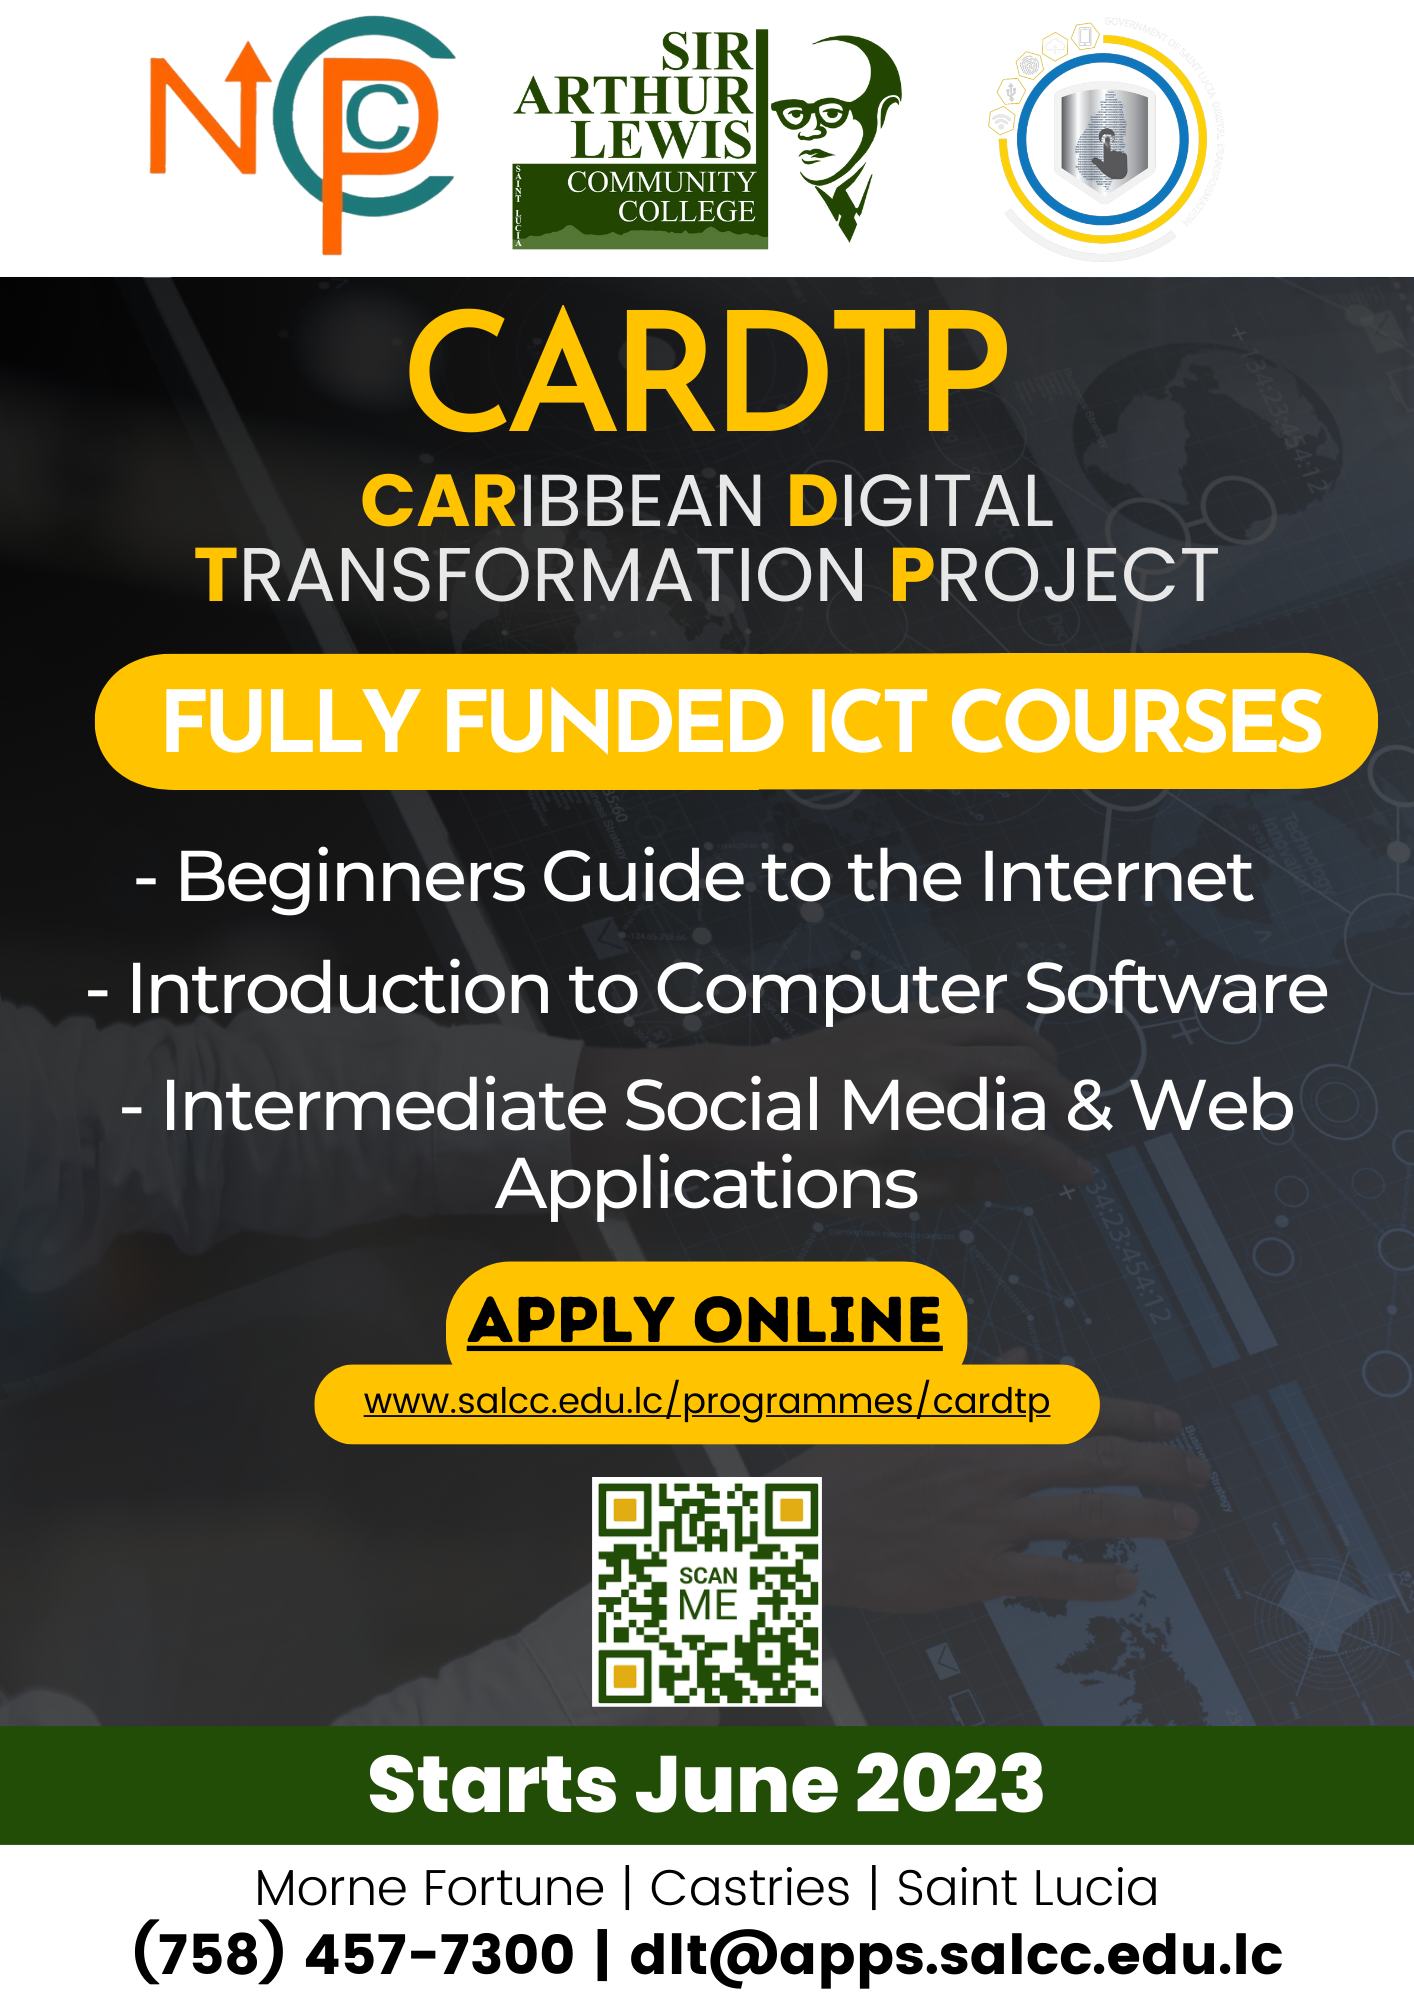 CARDTP Fully-funded Digital Literacy Training Courses.